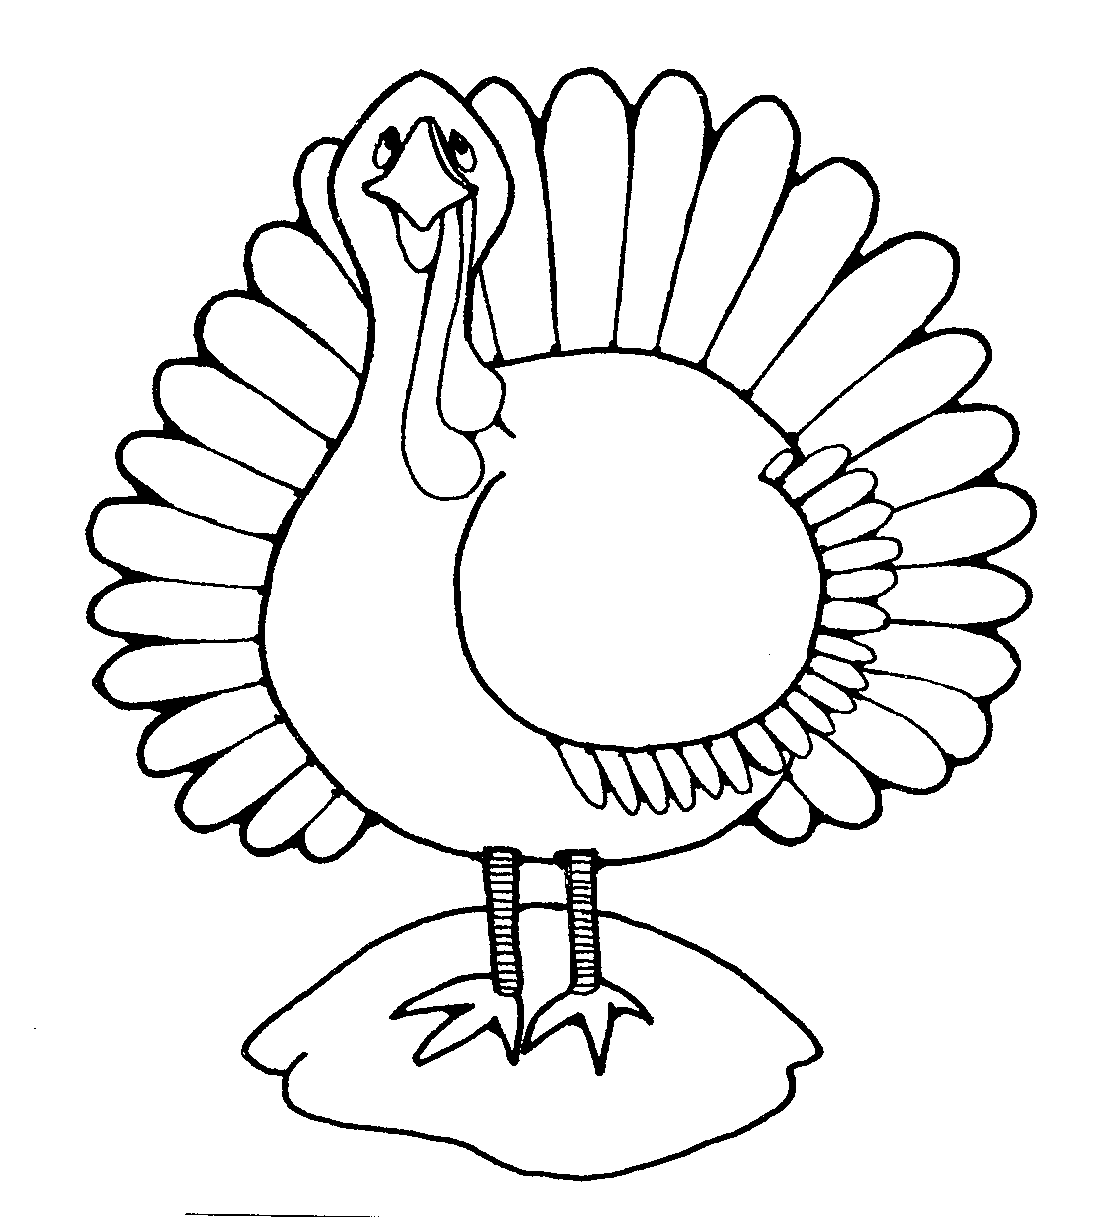 Thanksgiving Black And White Clip Art - Cliparts.co